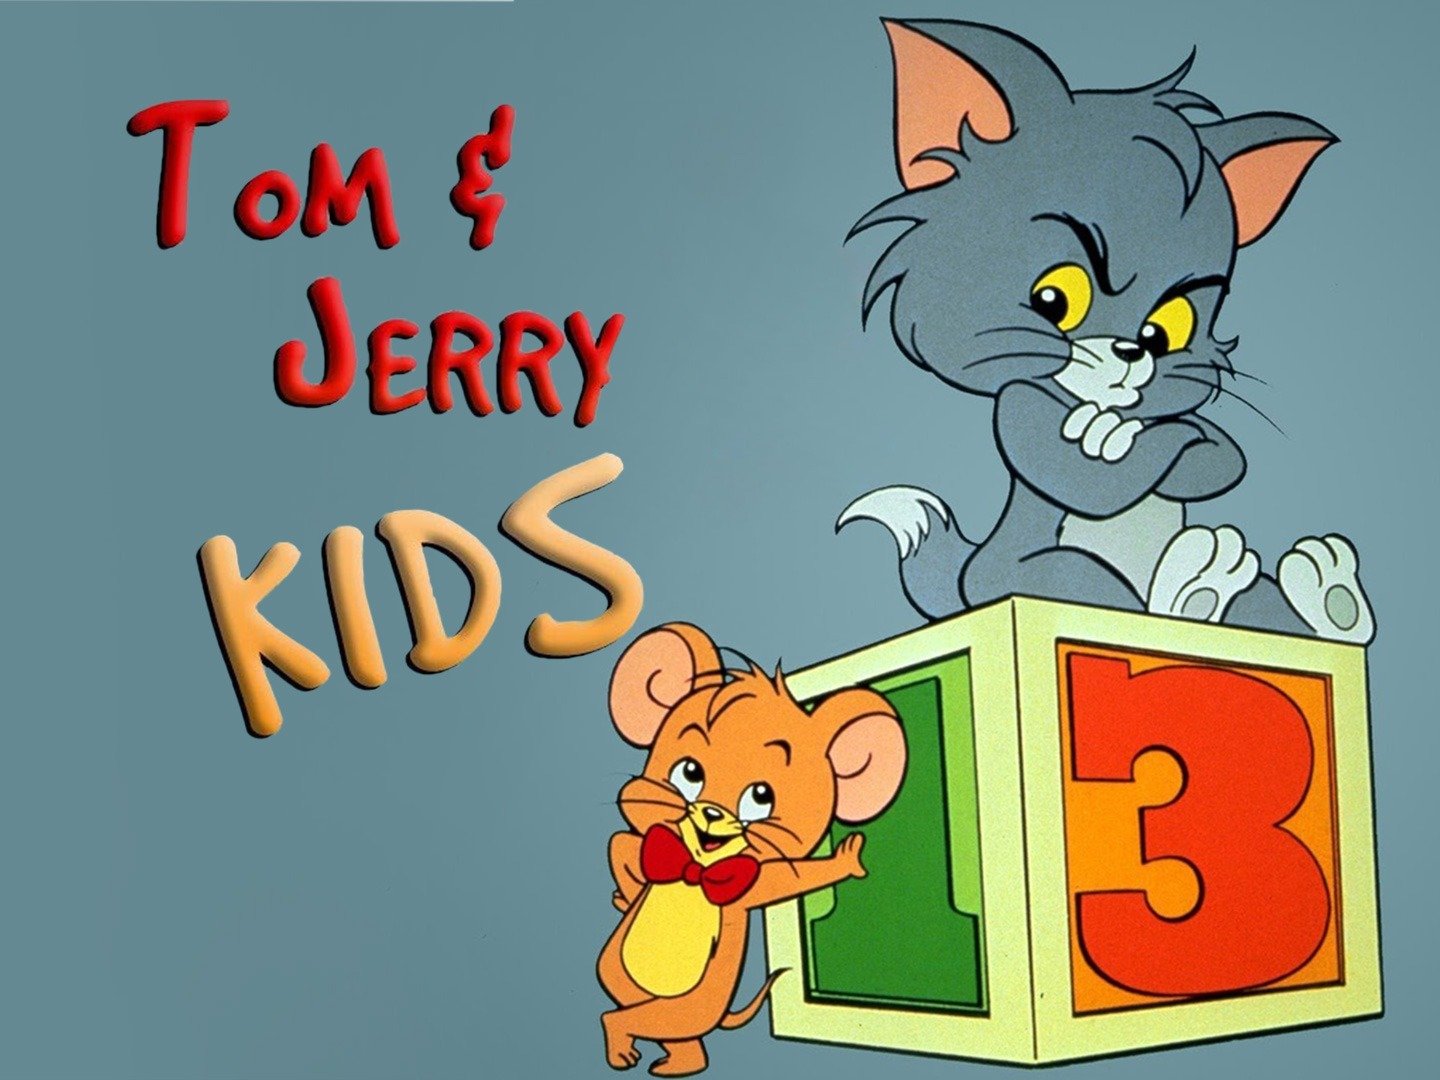 Tom & Jerry Kids - Rotten Tomatoes